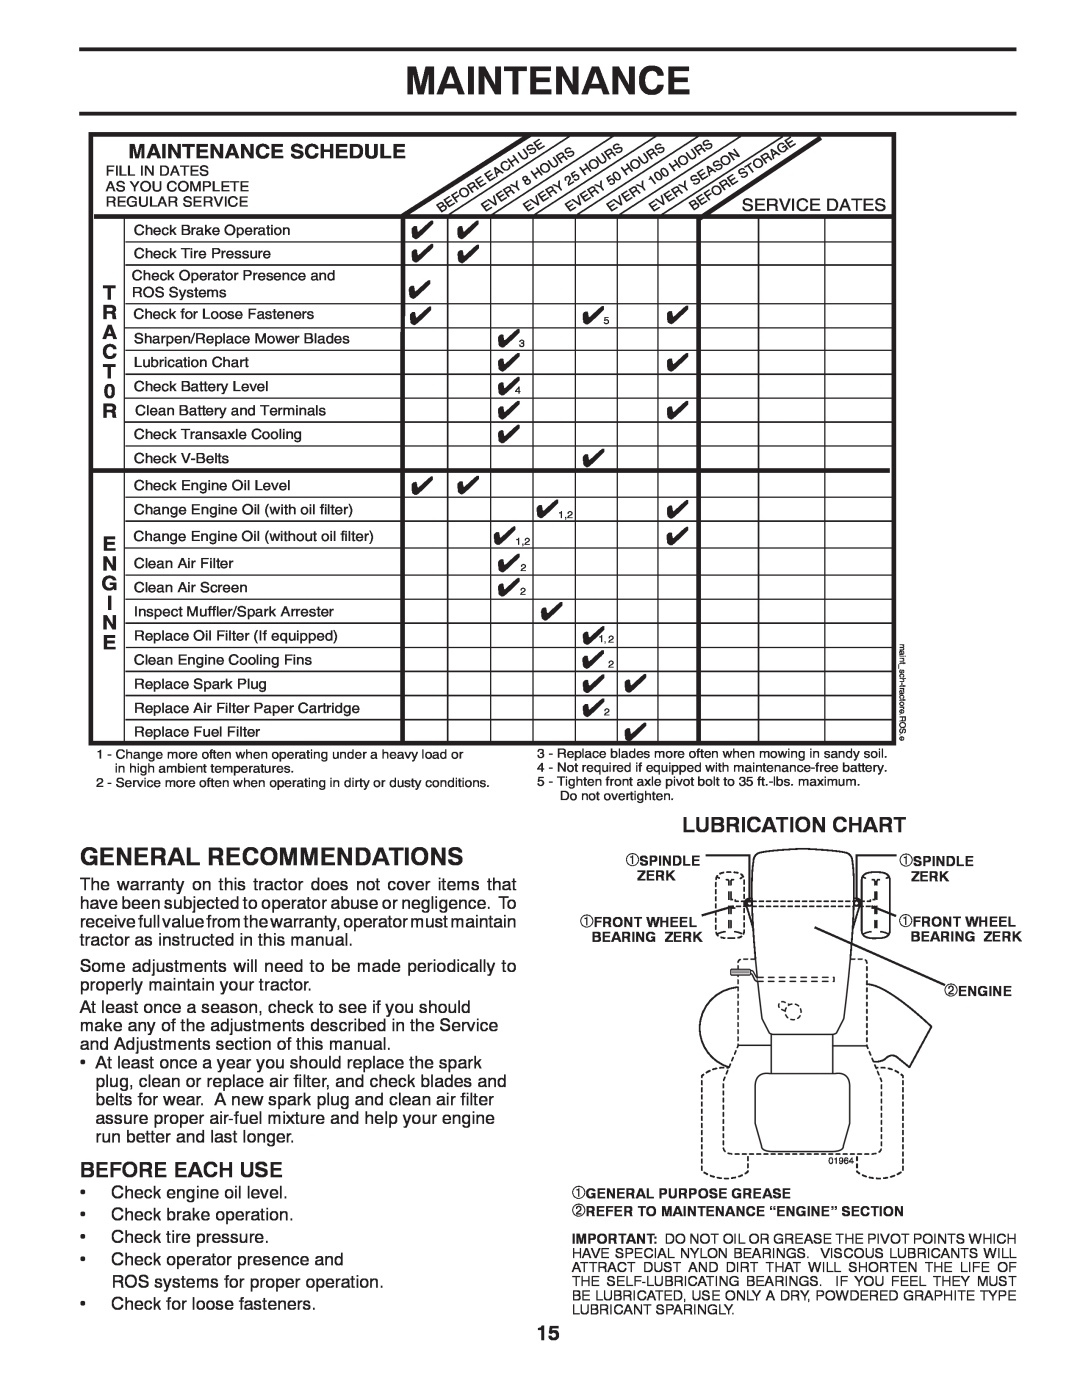 Husqvarna LTH1842 manual Maintenance, General Recommendations, Lubrication Chart, Before Each Use 